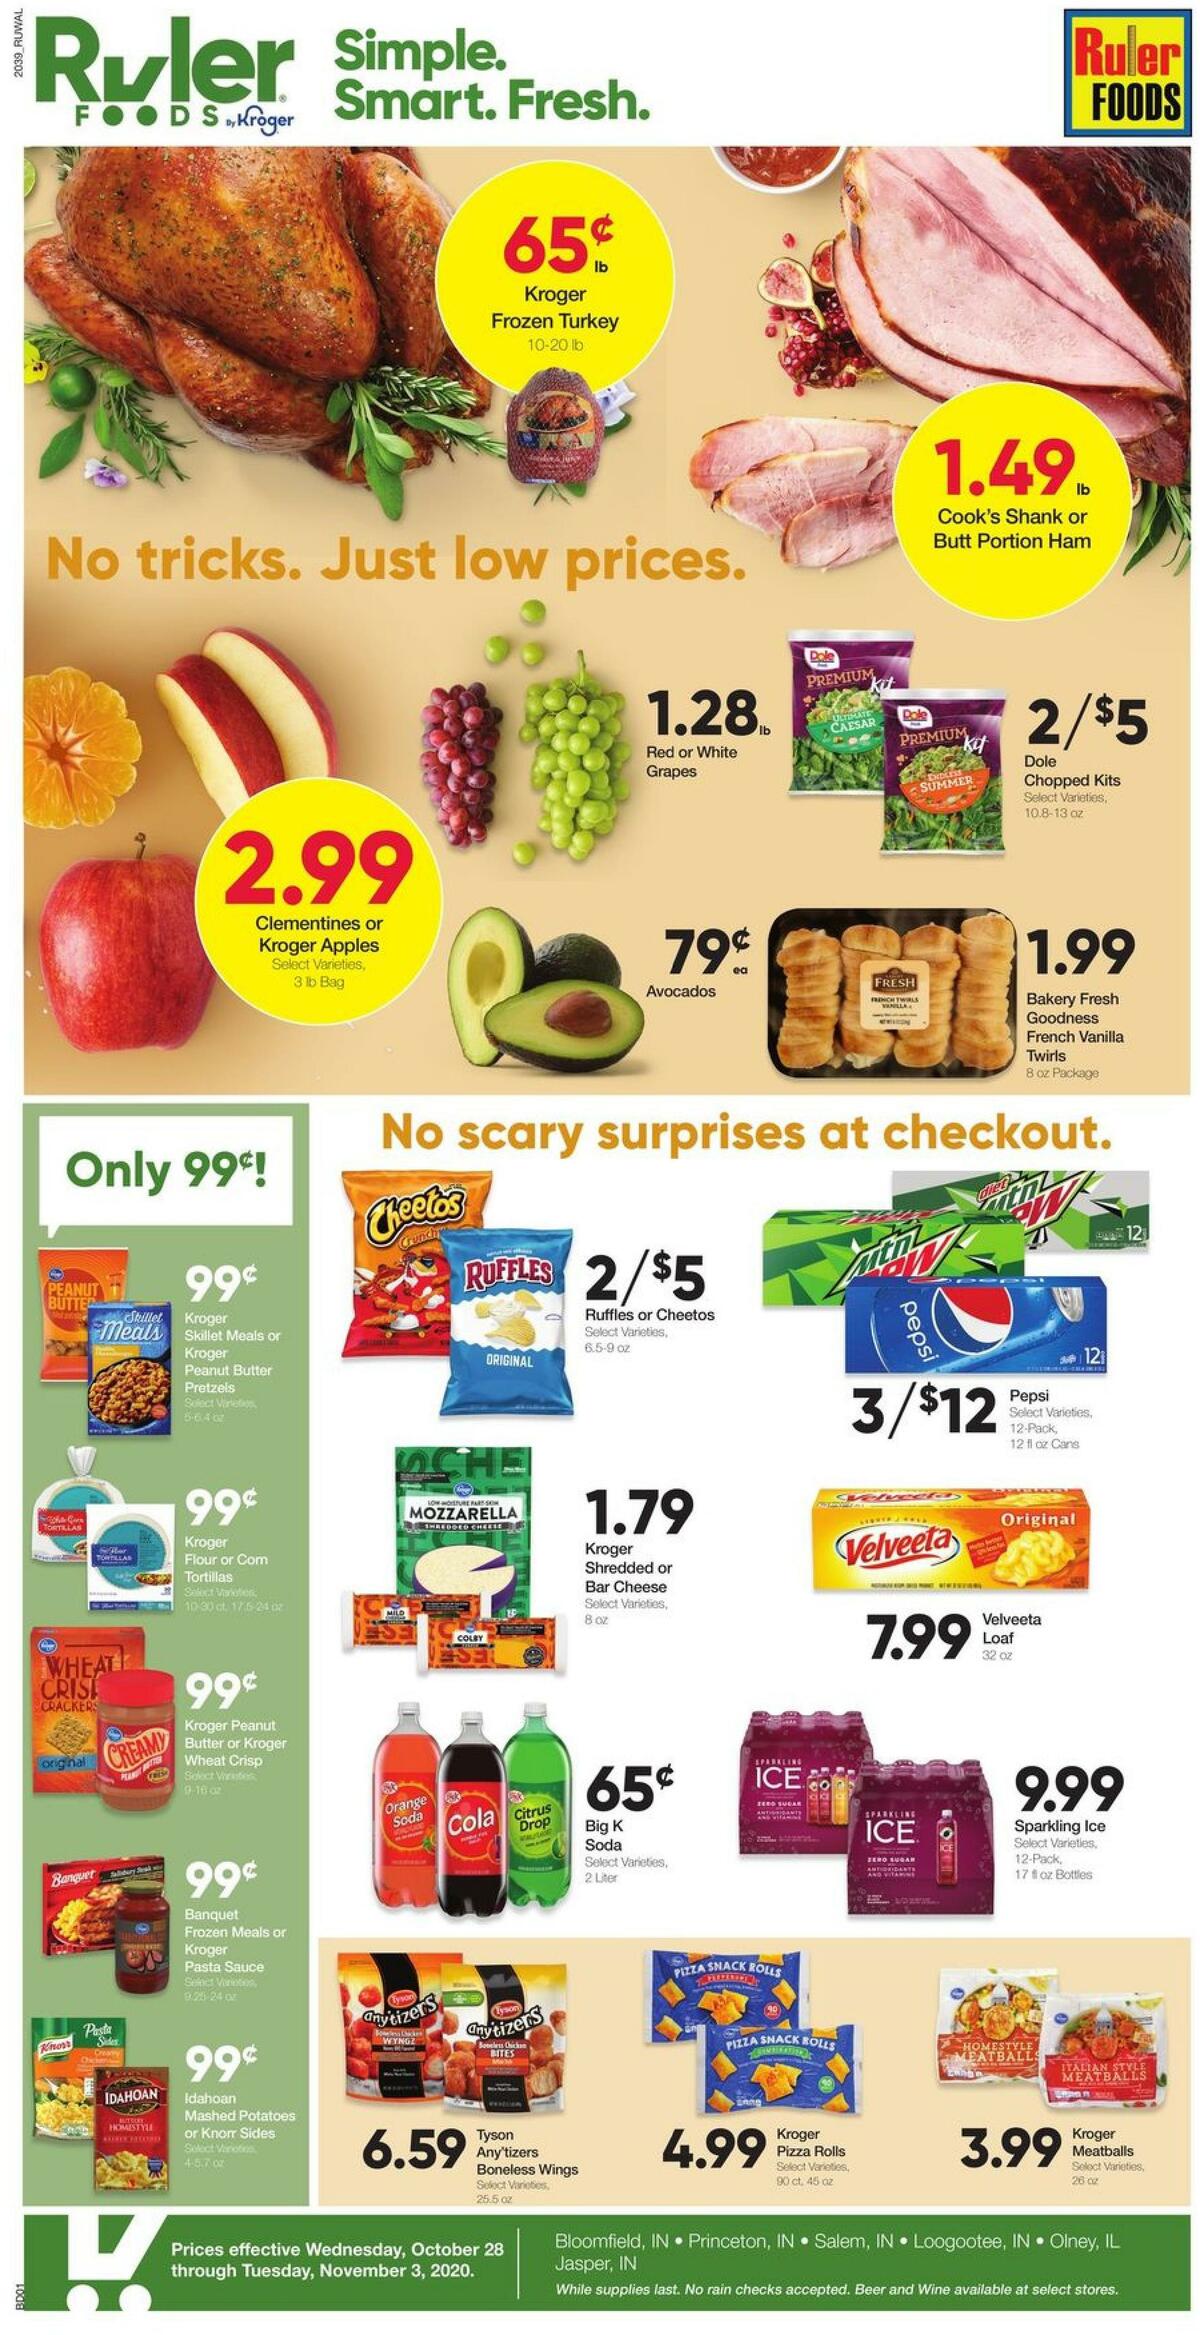 Ruler Foods Weekly Ad from October 28